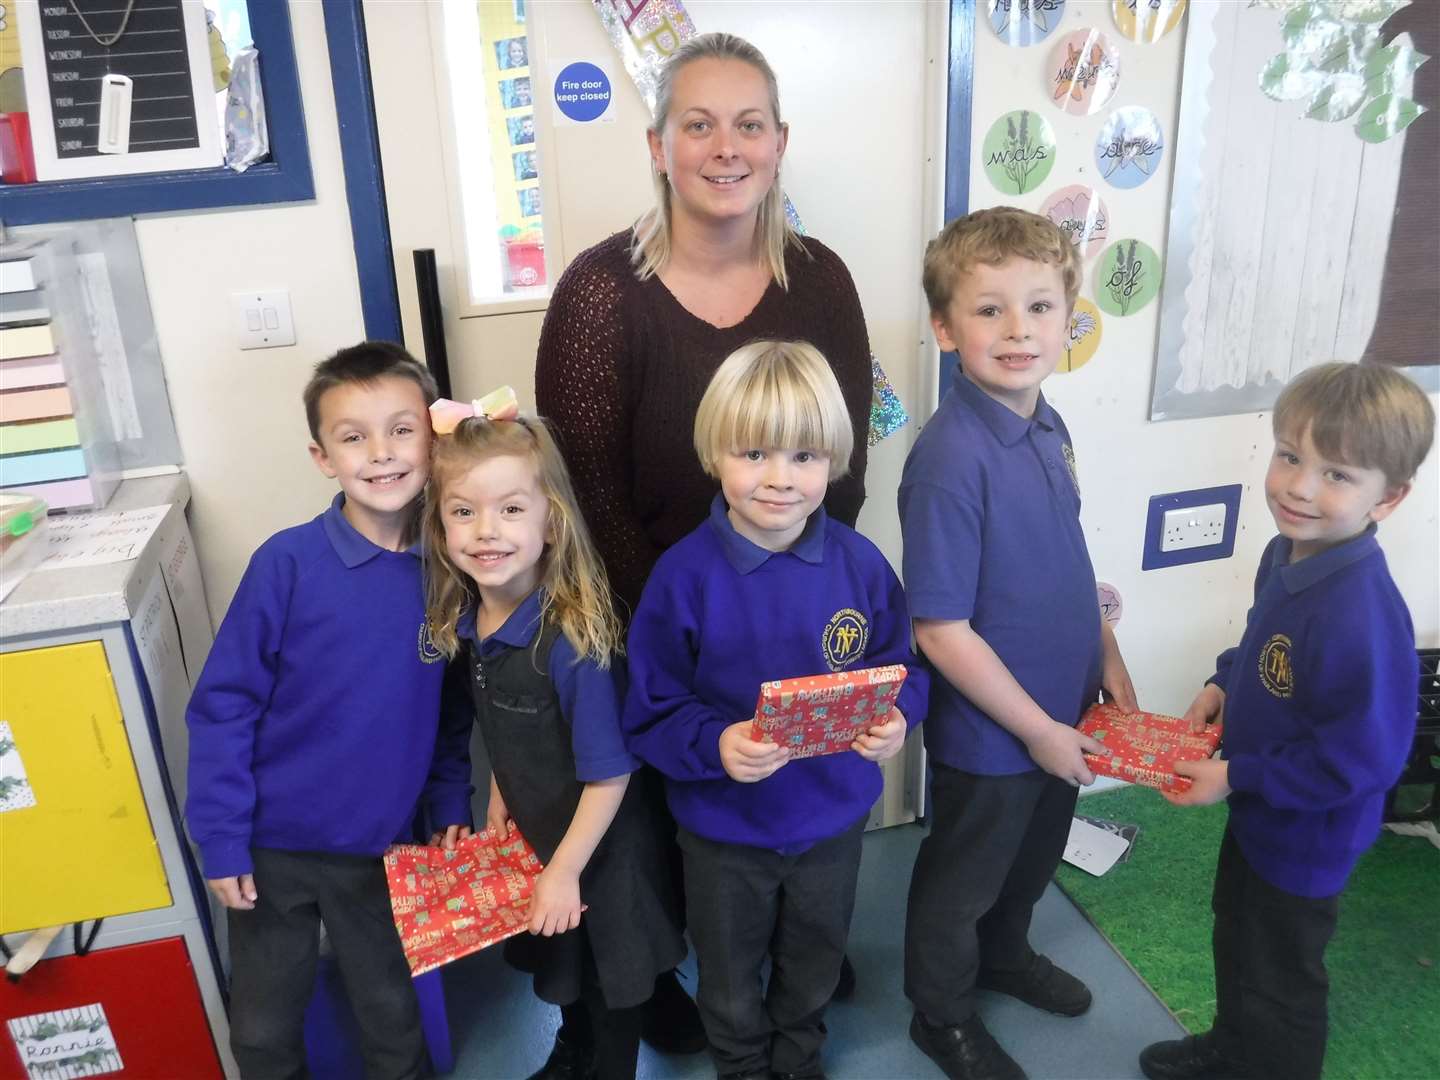 Pupils have been helping Year 1 teaching assistant Hayley Lamb to prepare small birthday gifts ahead of this Friday's party